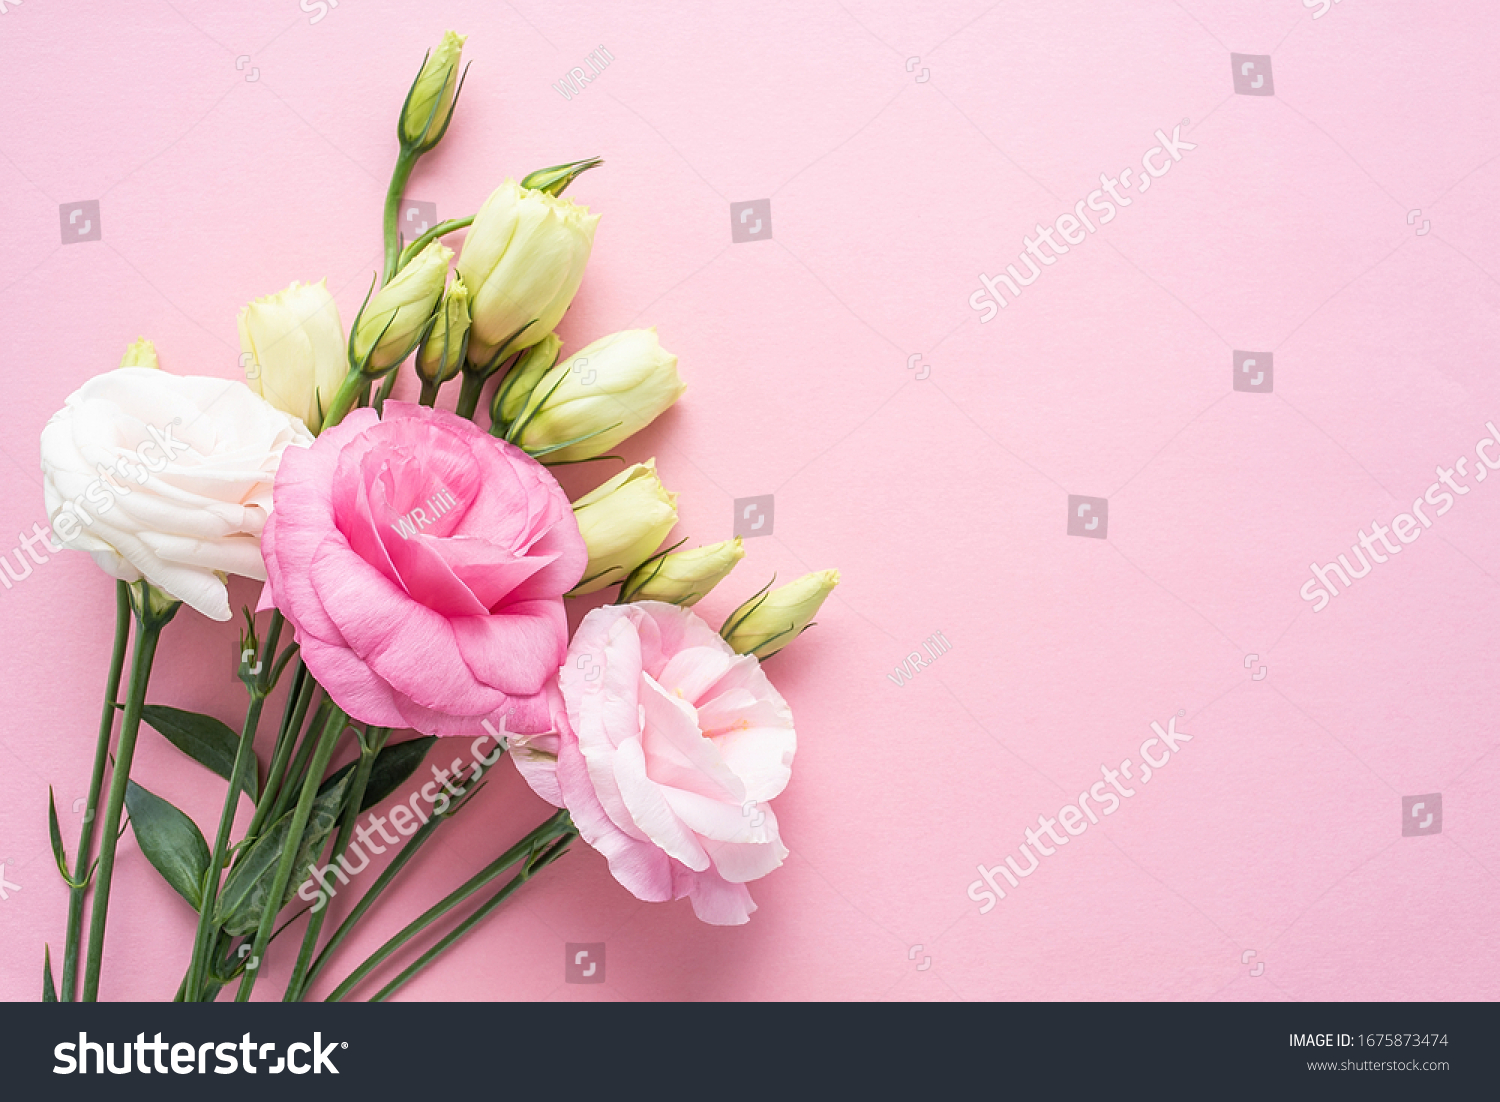 Bunch of beautiful eustoma flowers on pink background	 #1675873474